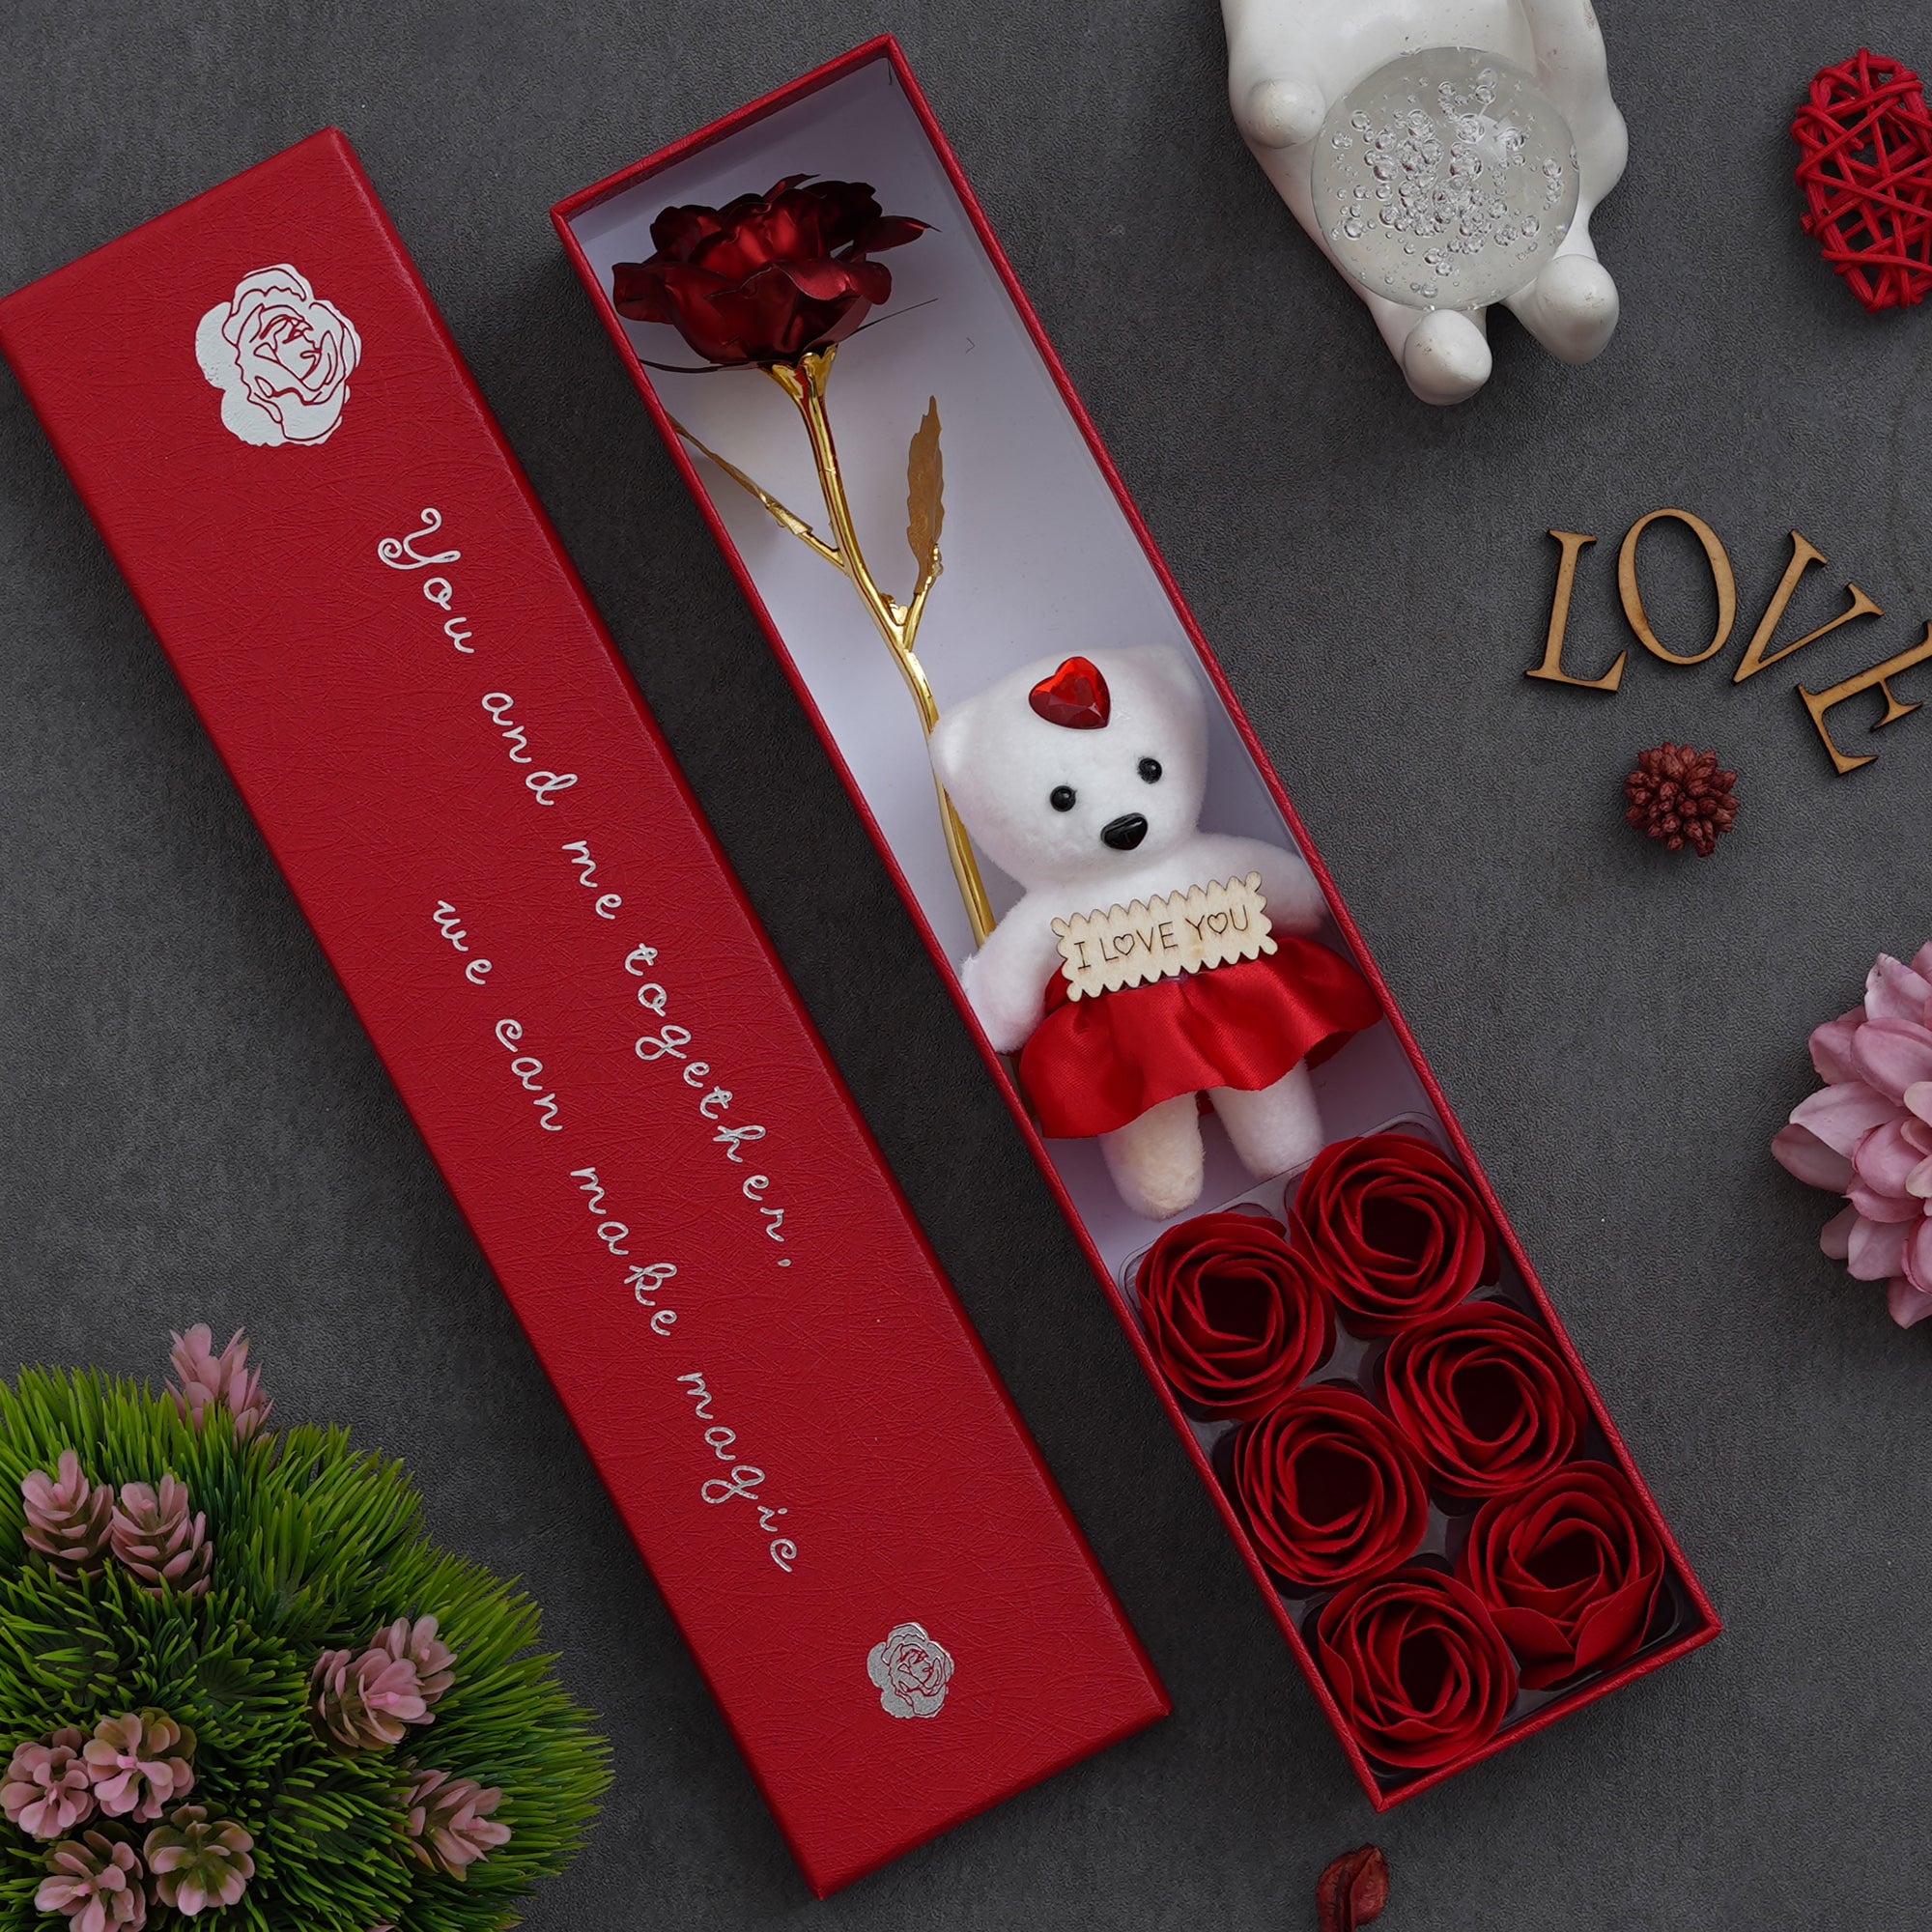 Valentine Combo of Pack of 8 Love Gift Cards, Red Gift Box with Teddy & Roses, "Things I Love About You" Puzzle Wooden Gift Set 3